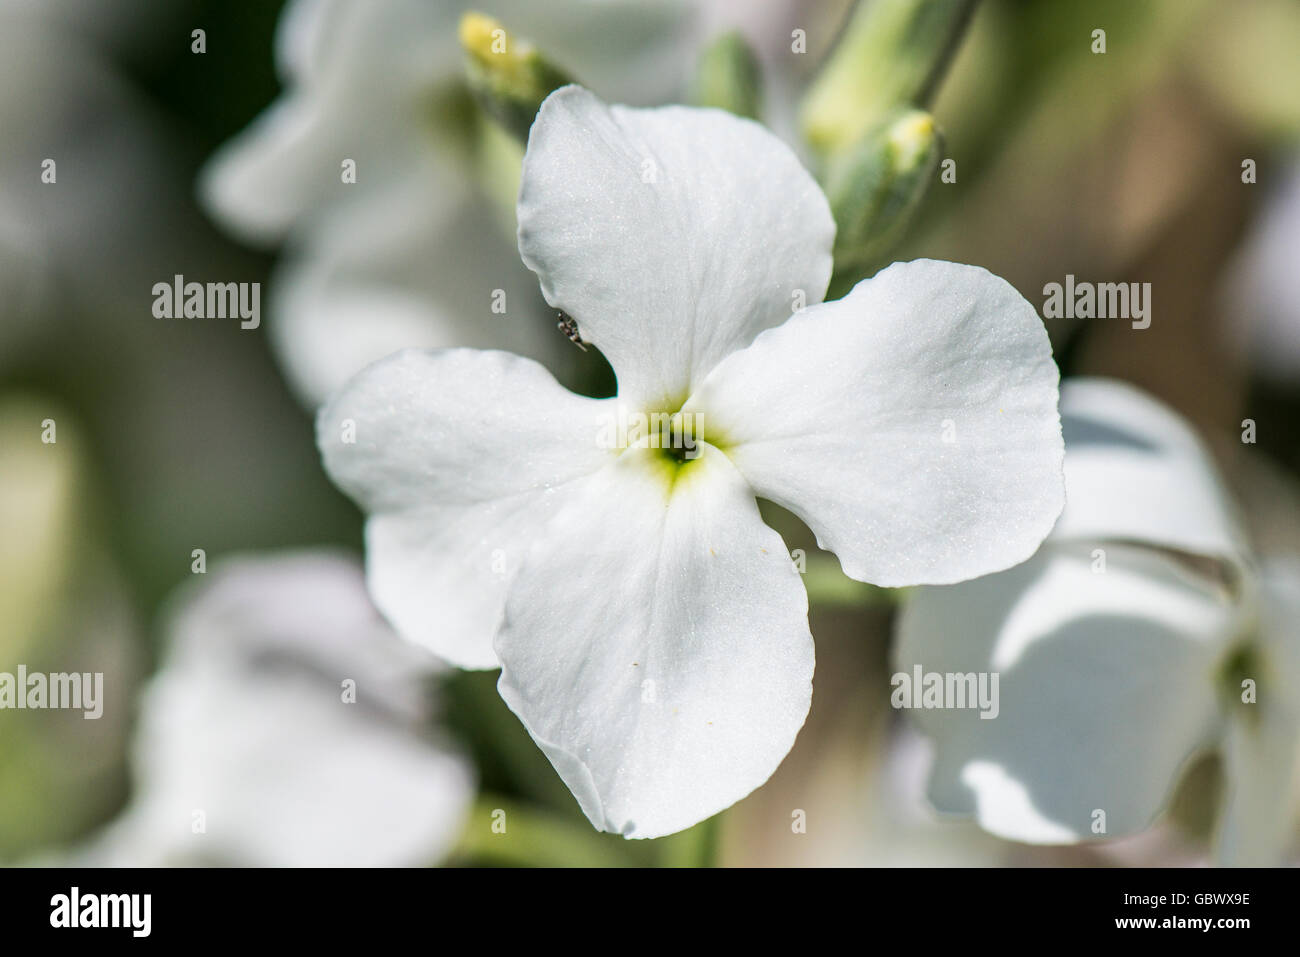 A close up the flower of a white night-scented stock (Matthiola longipetala) Stock Photo